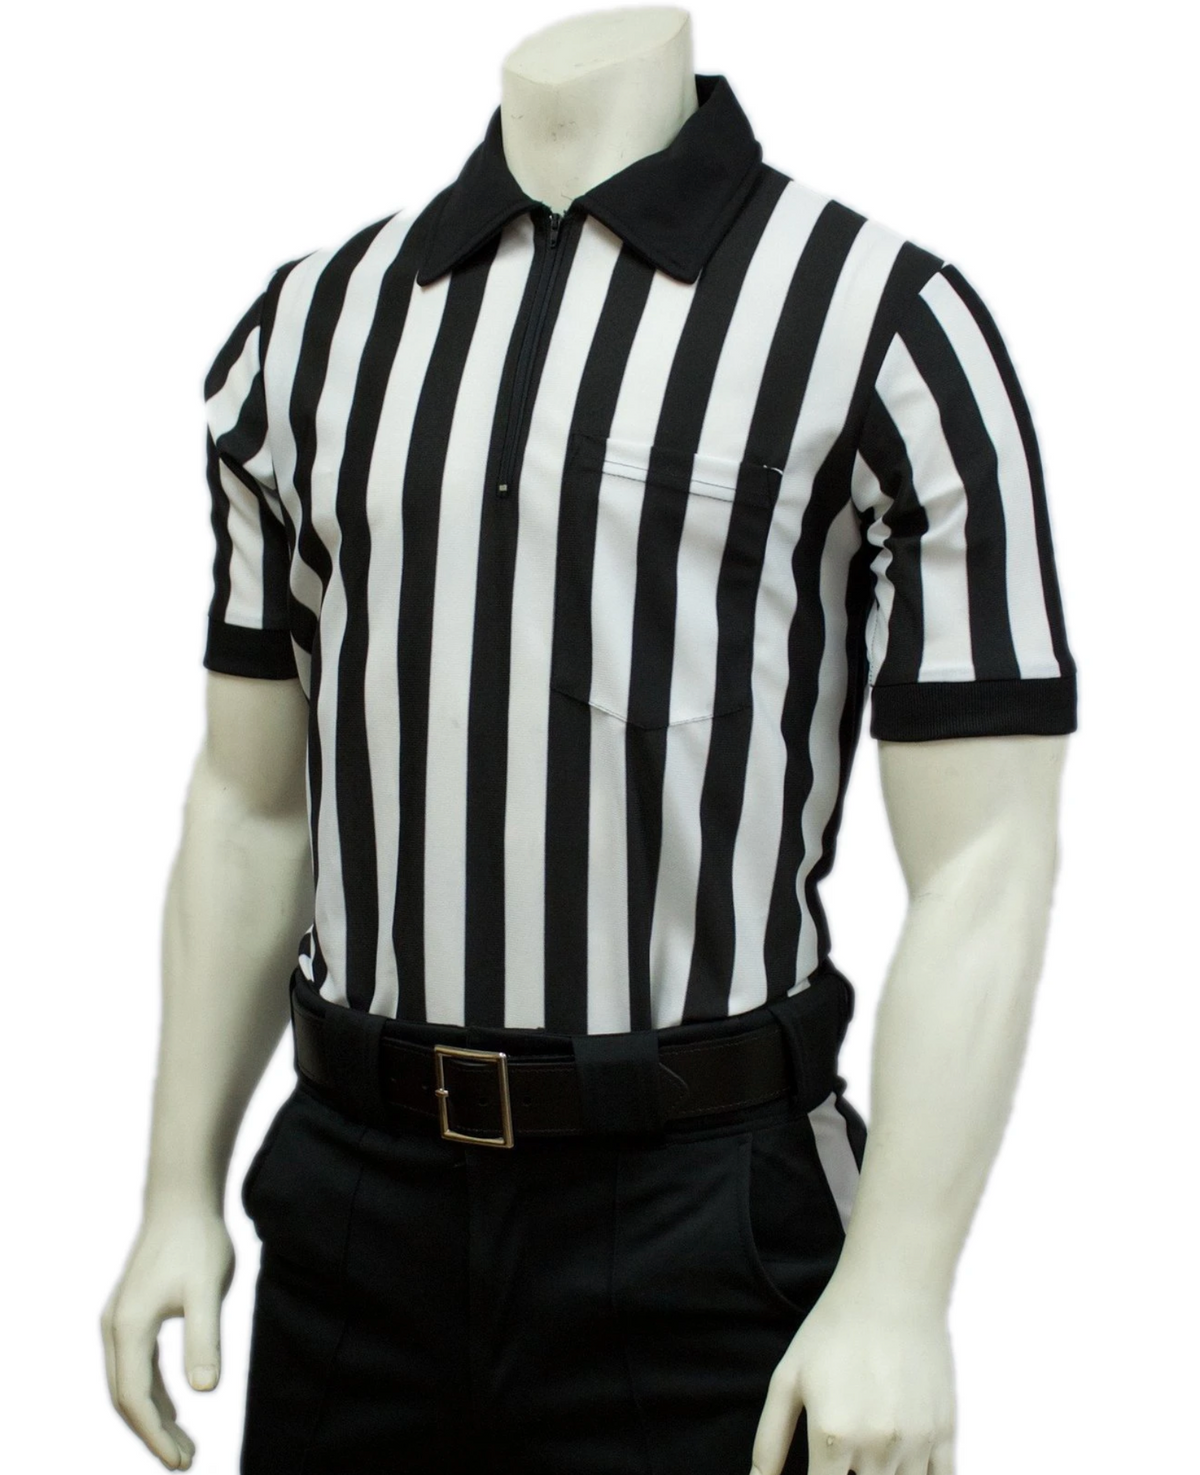 Smitty | FBS-101 | 100% Polyester Referee Shirt